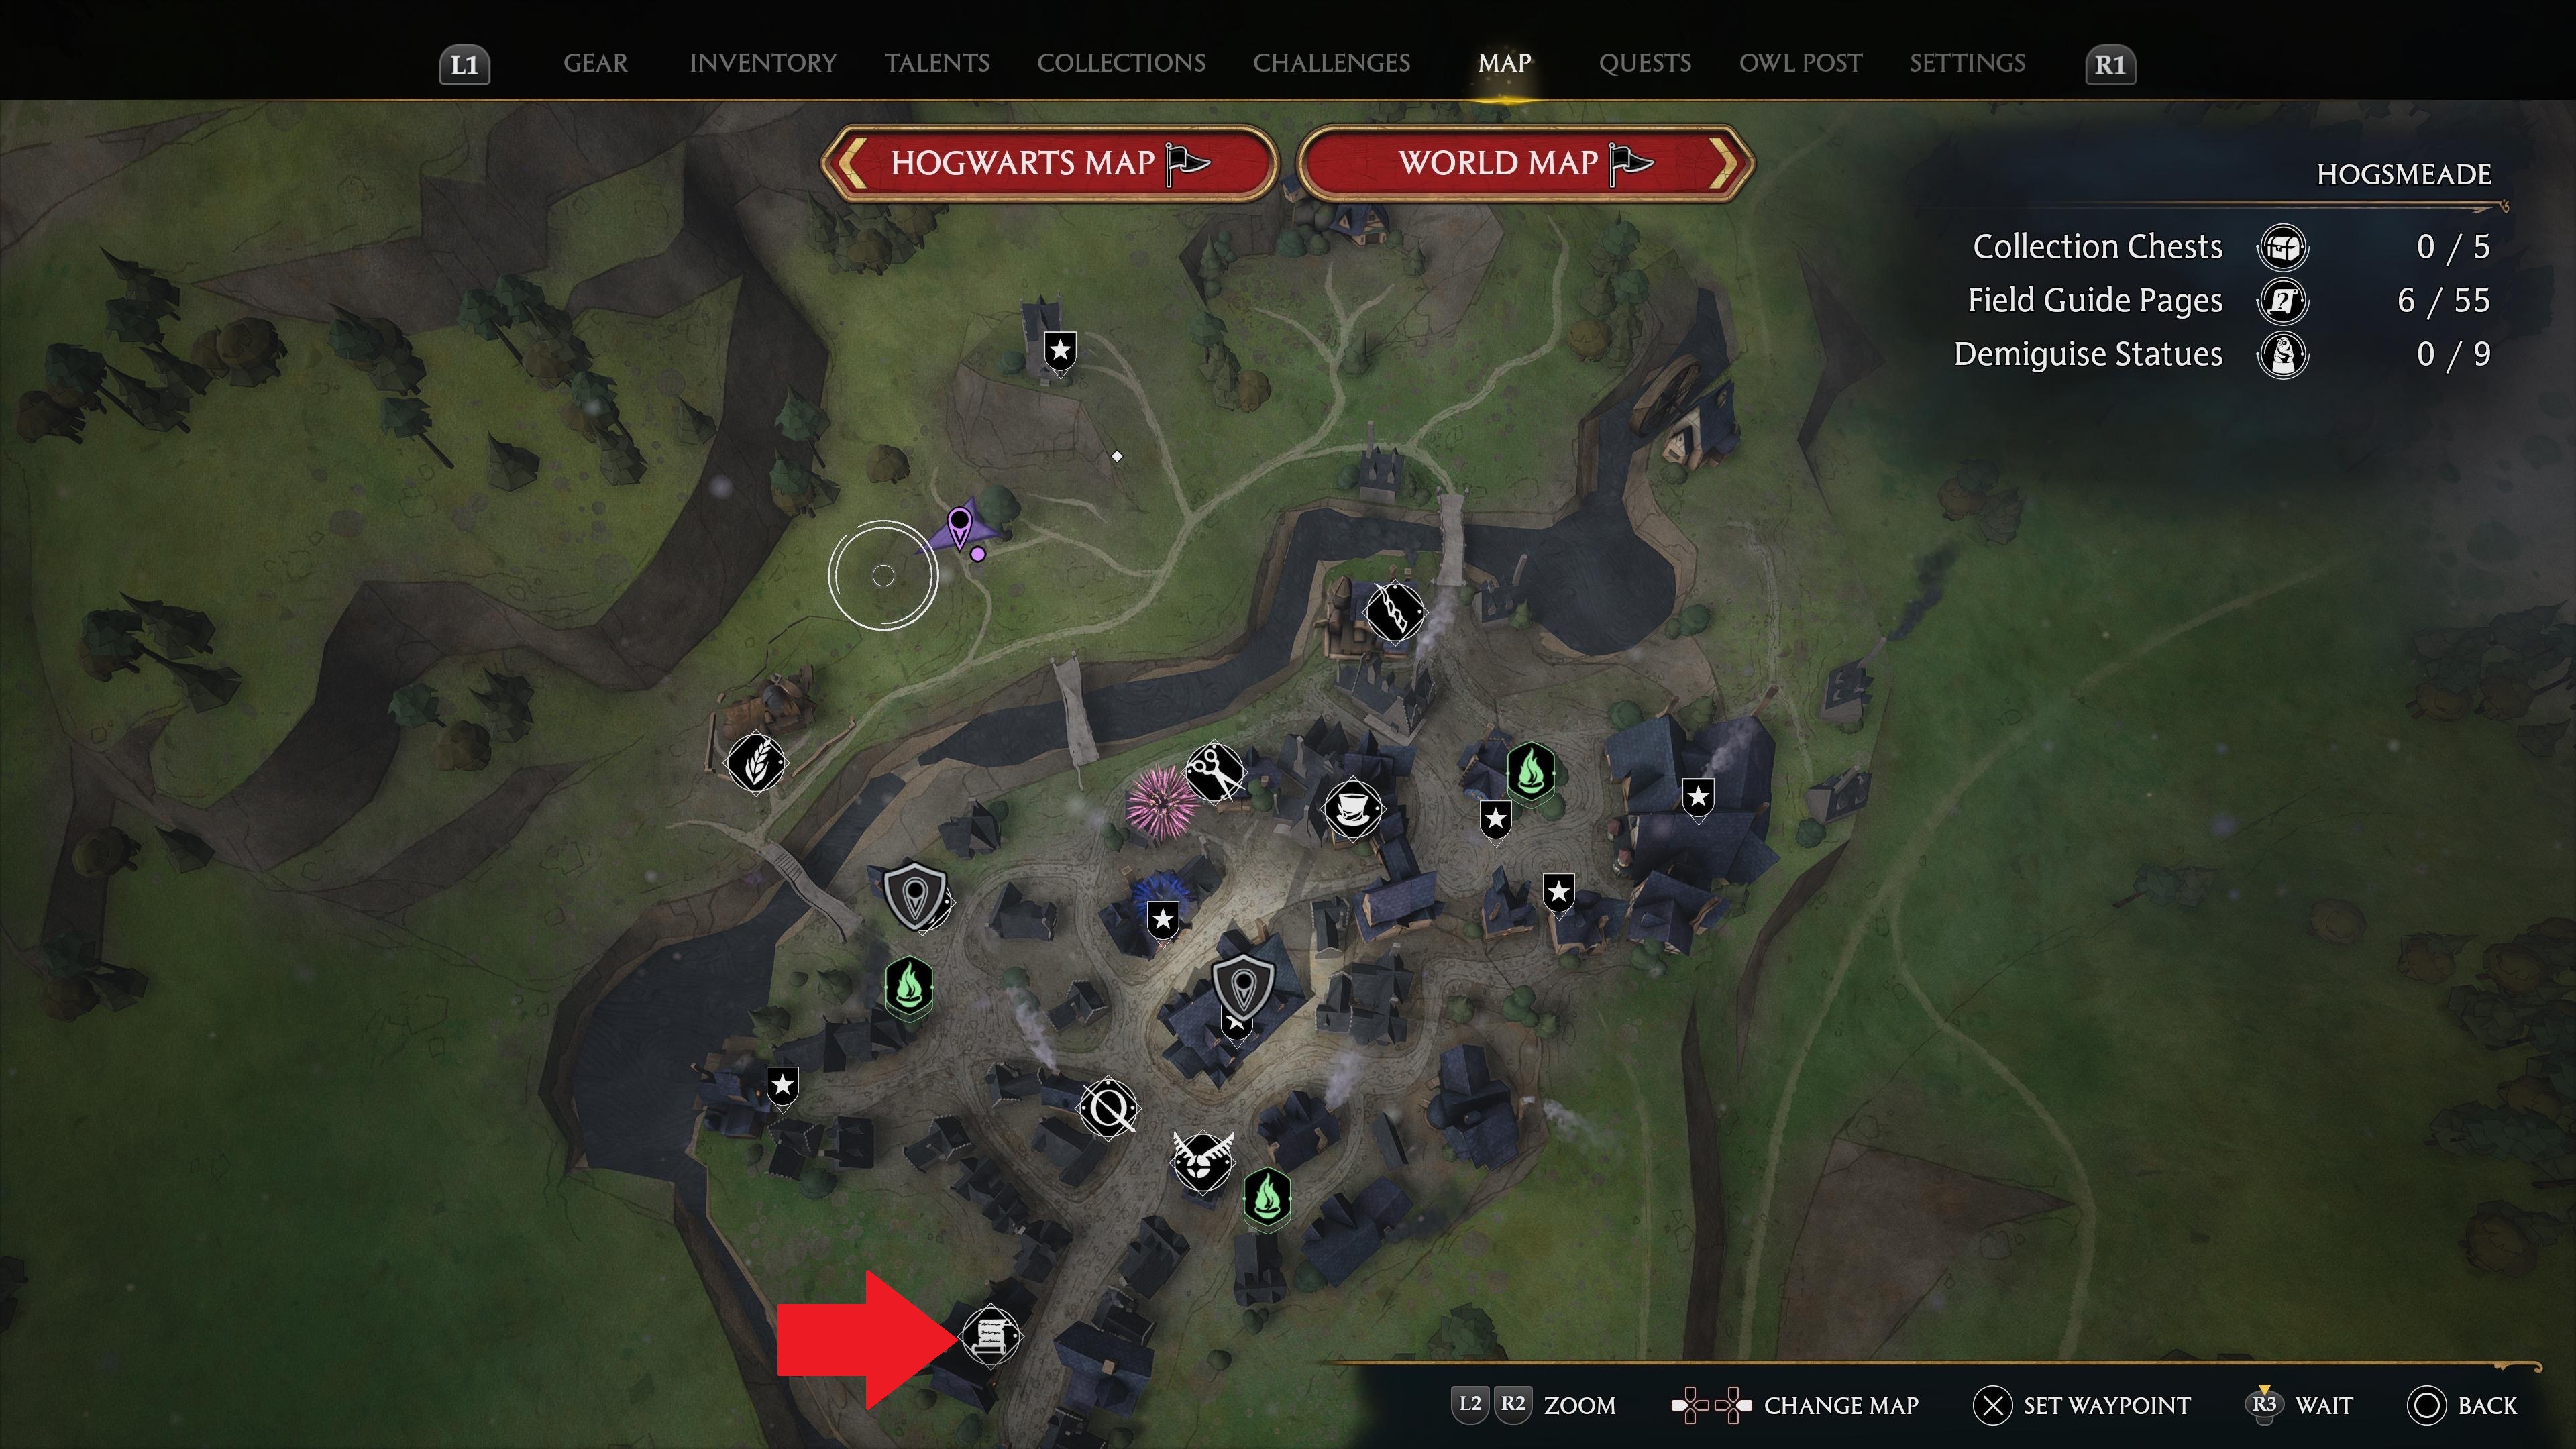 Where to find Fluxweed Stem in Hogwarts Legacy - Dot Esports